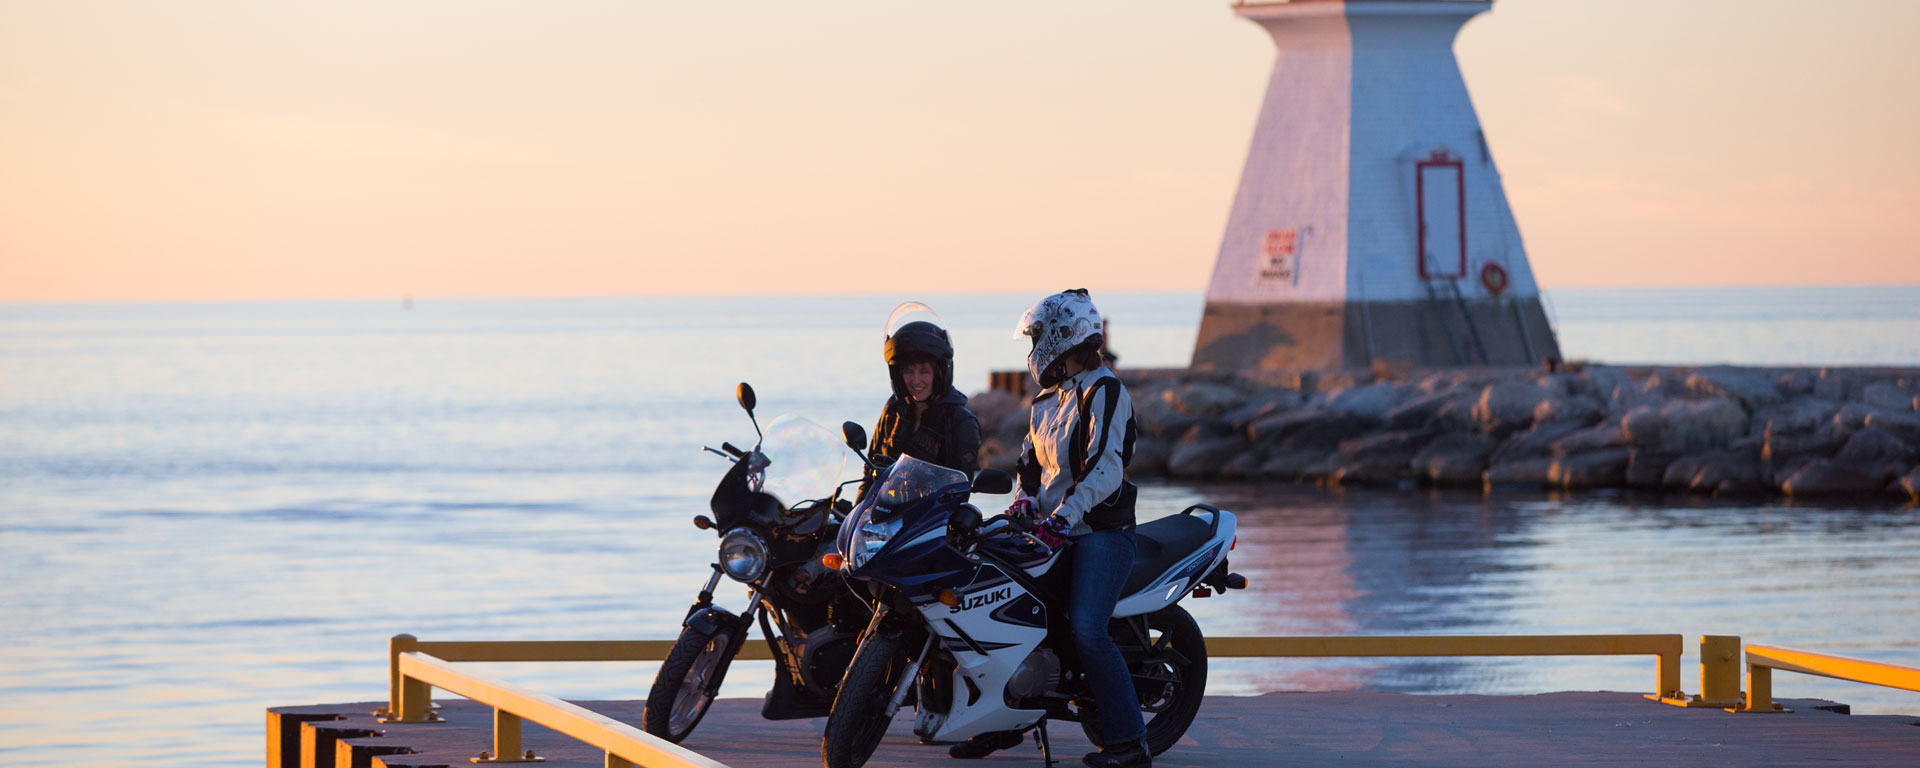 two bikers stopped on a pier, chatting with each other with a lighthouse and the lake in the background.